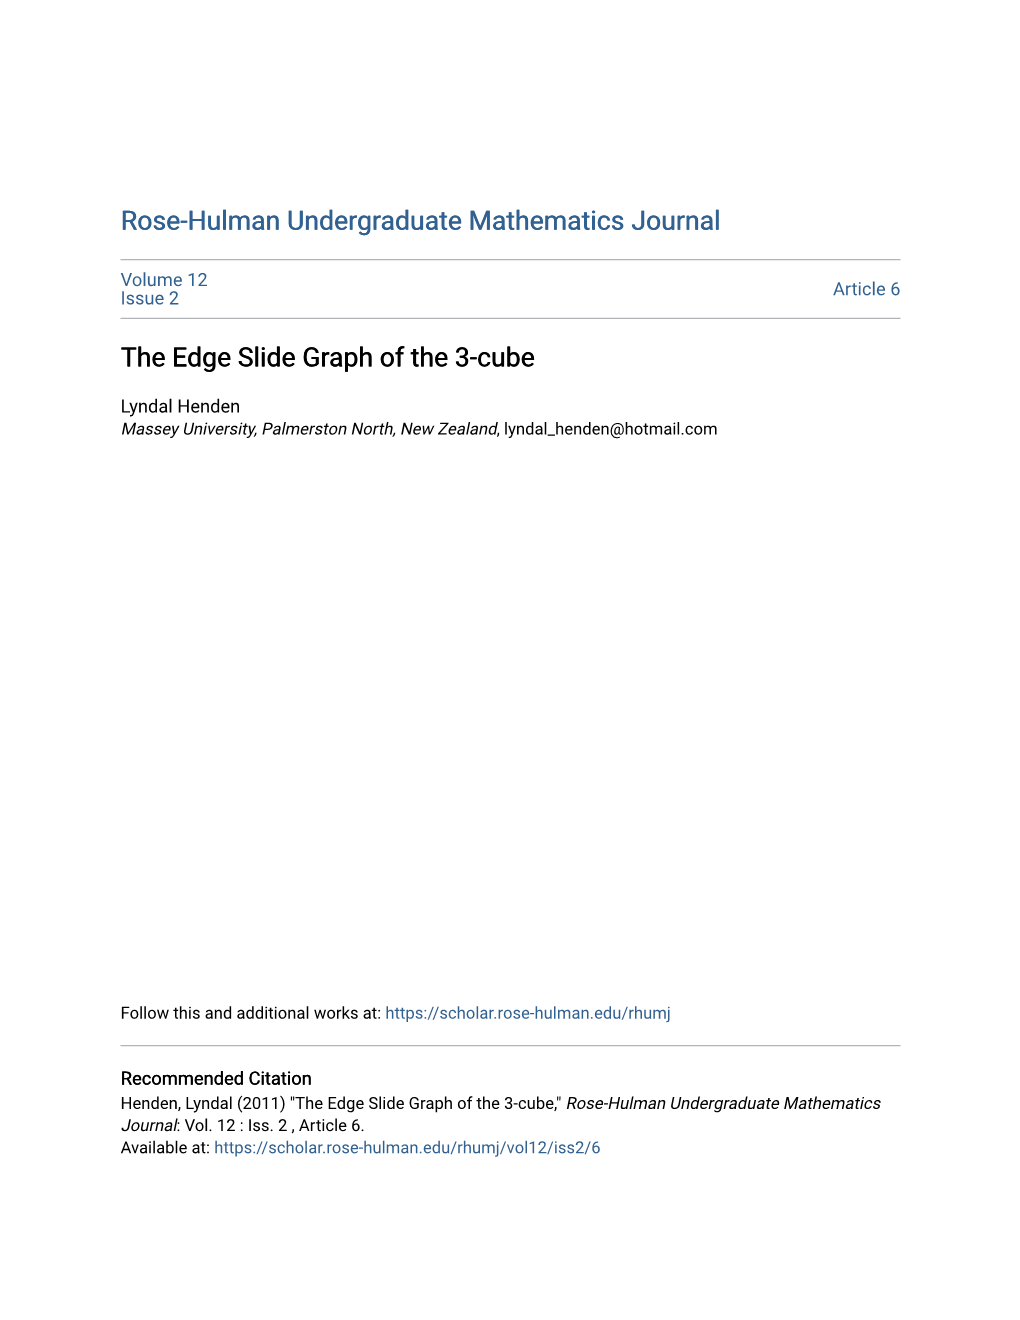 The Edge Slide Graph of the 3-Cube